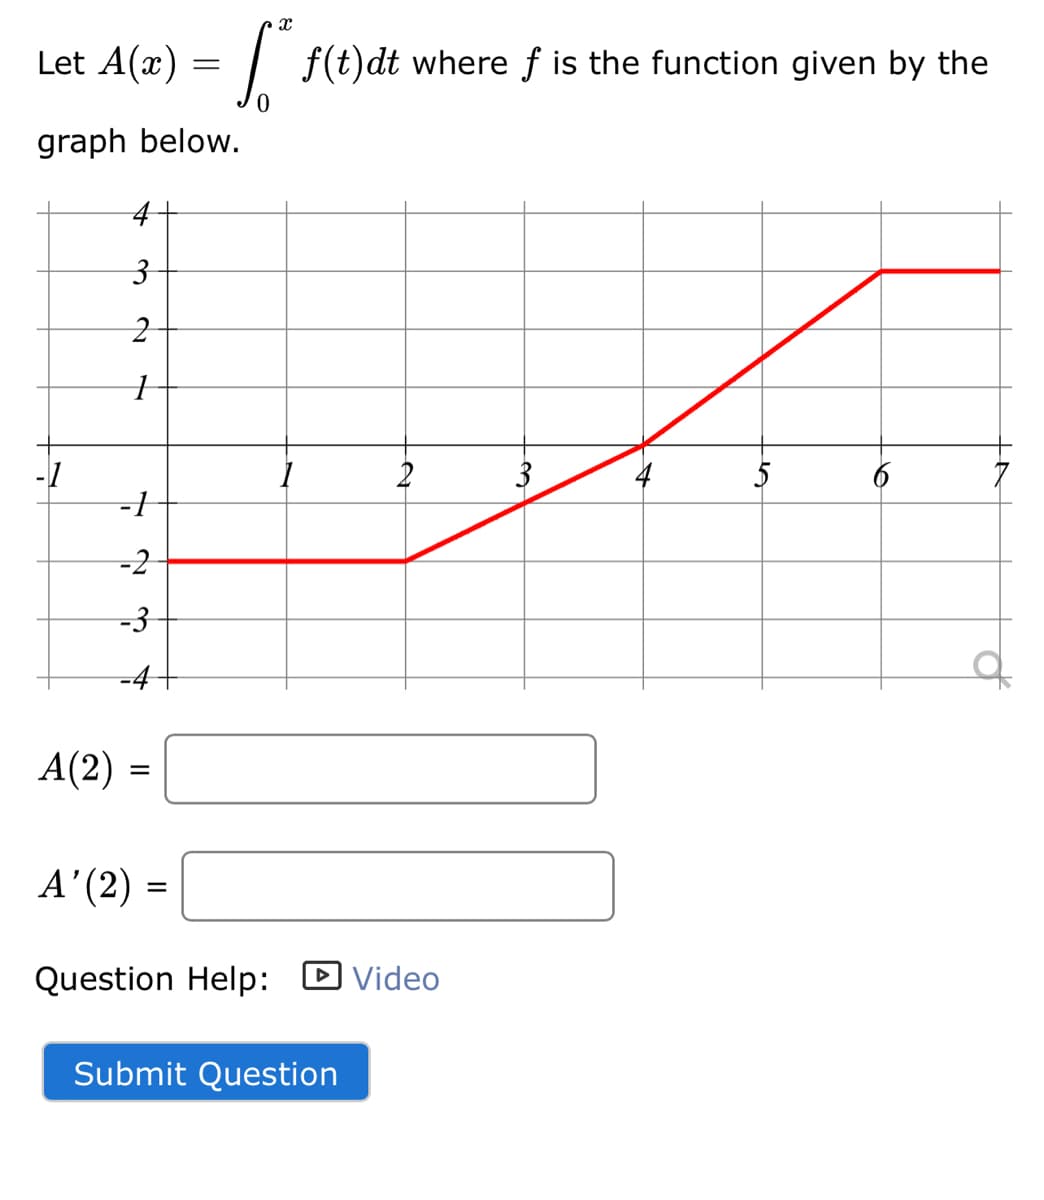 Let A(x) = | f(t)dt where f is the function given by the
graph below.
4-
2
6
-1
-2
-3
-4
A(2) =
%3|
A'(2) =
Question Help:
DVideo
Submit Question
